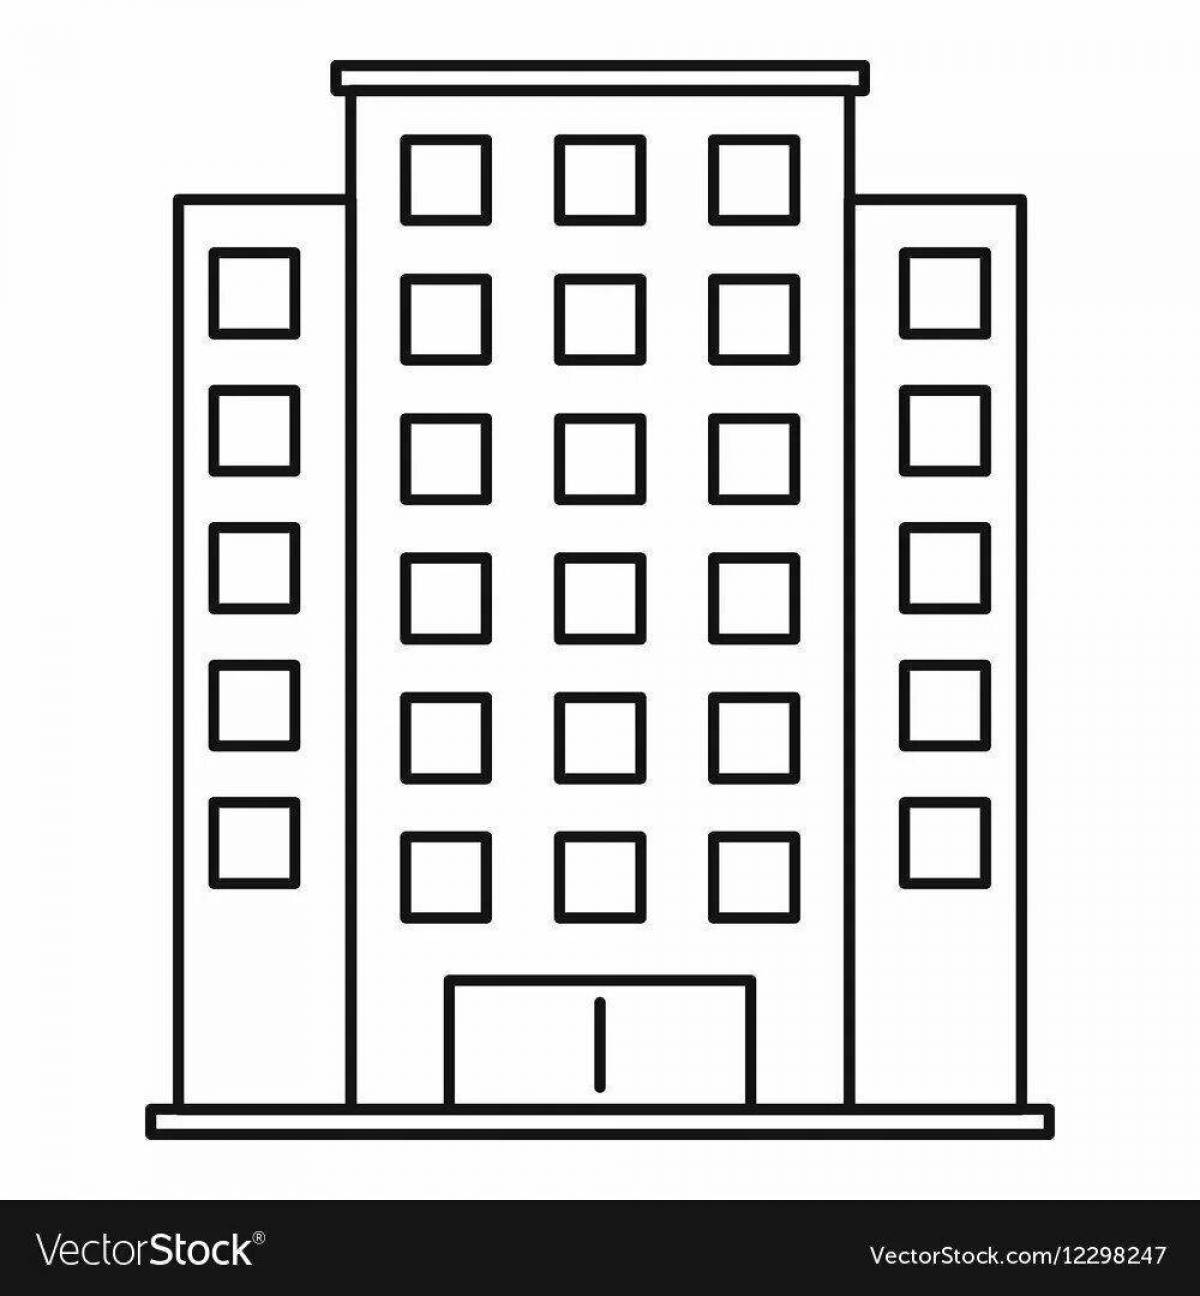 Great tall buildings coloring book for kids